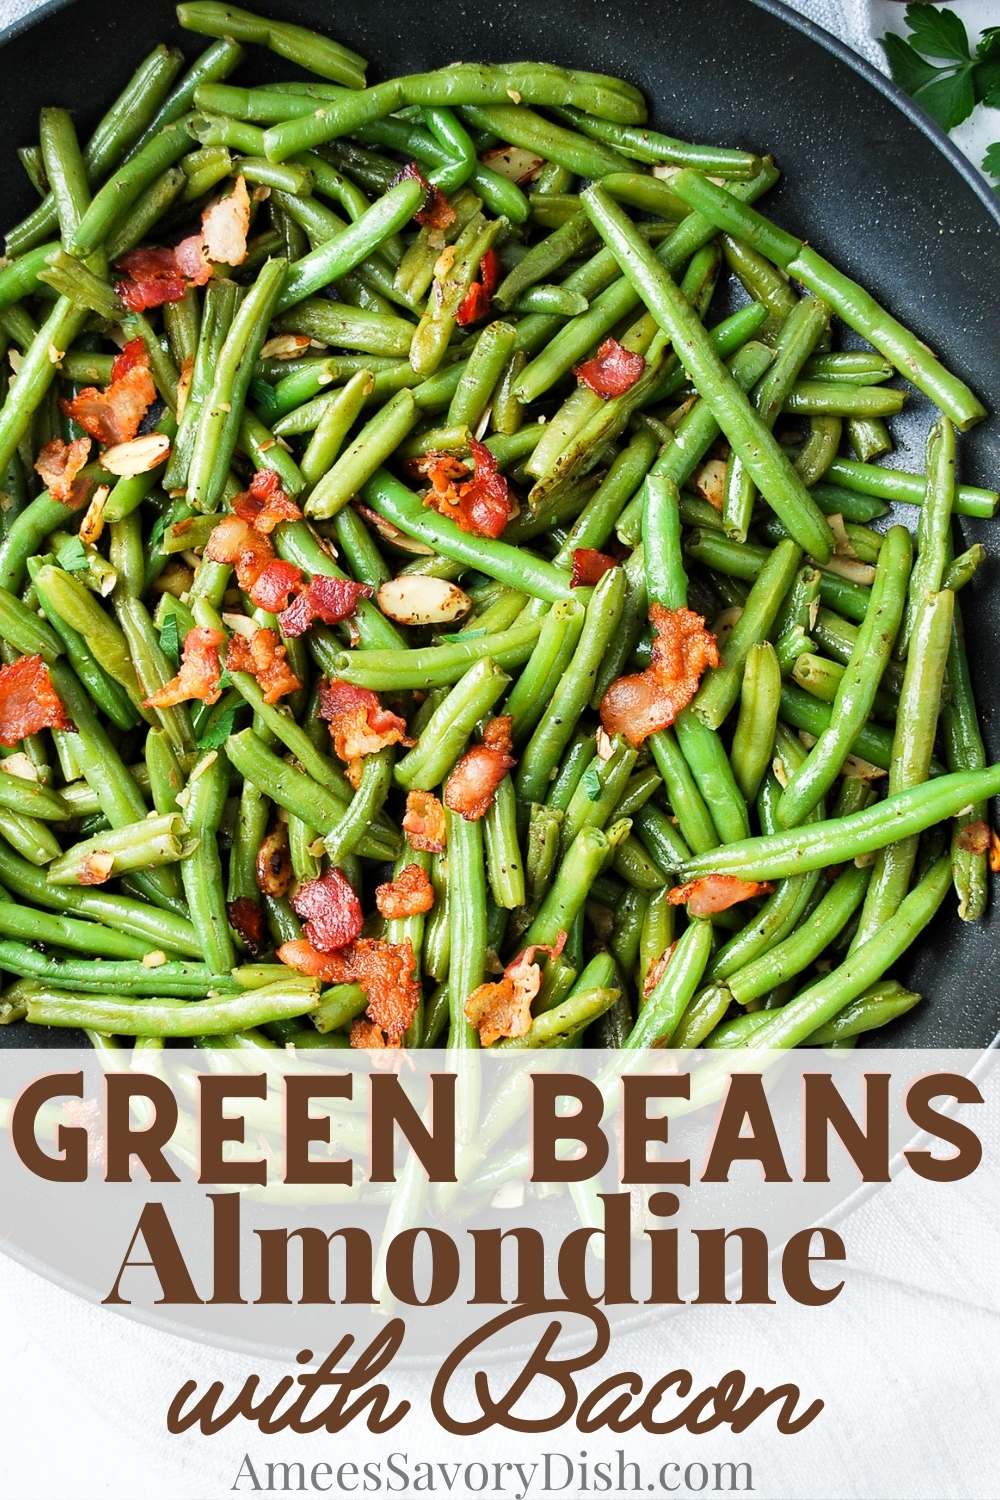 Perfectly sauteed greens beans tossed with crunchy almonds and crisp bacon crumbles—a quick and easy holiday side dish. via @Ameessavorydish